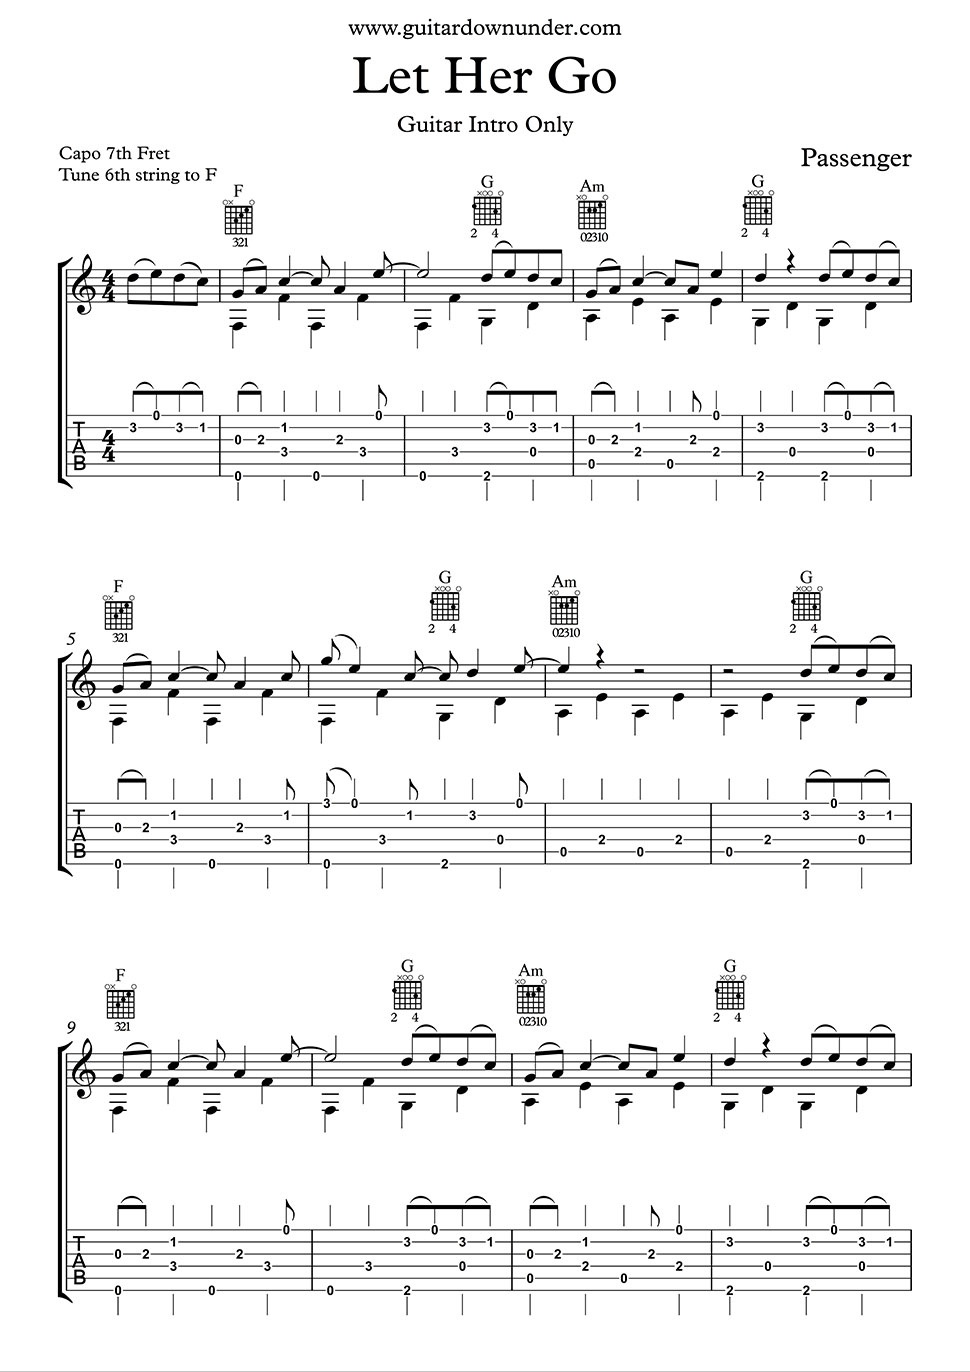 Let Her Go - Chords And Lyricspassenger Includes Correct Guitar Tab. - Let Her Go Piano Sheet Music Free Printable